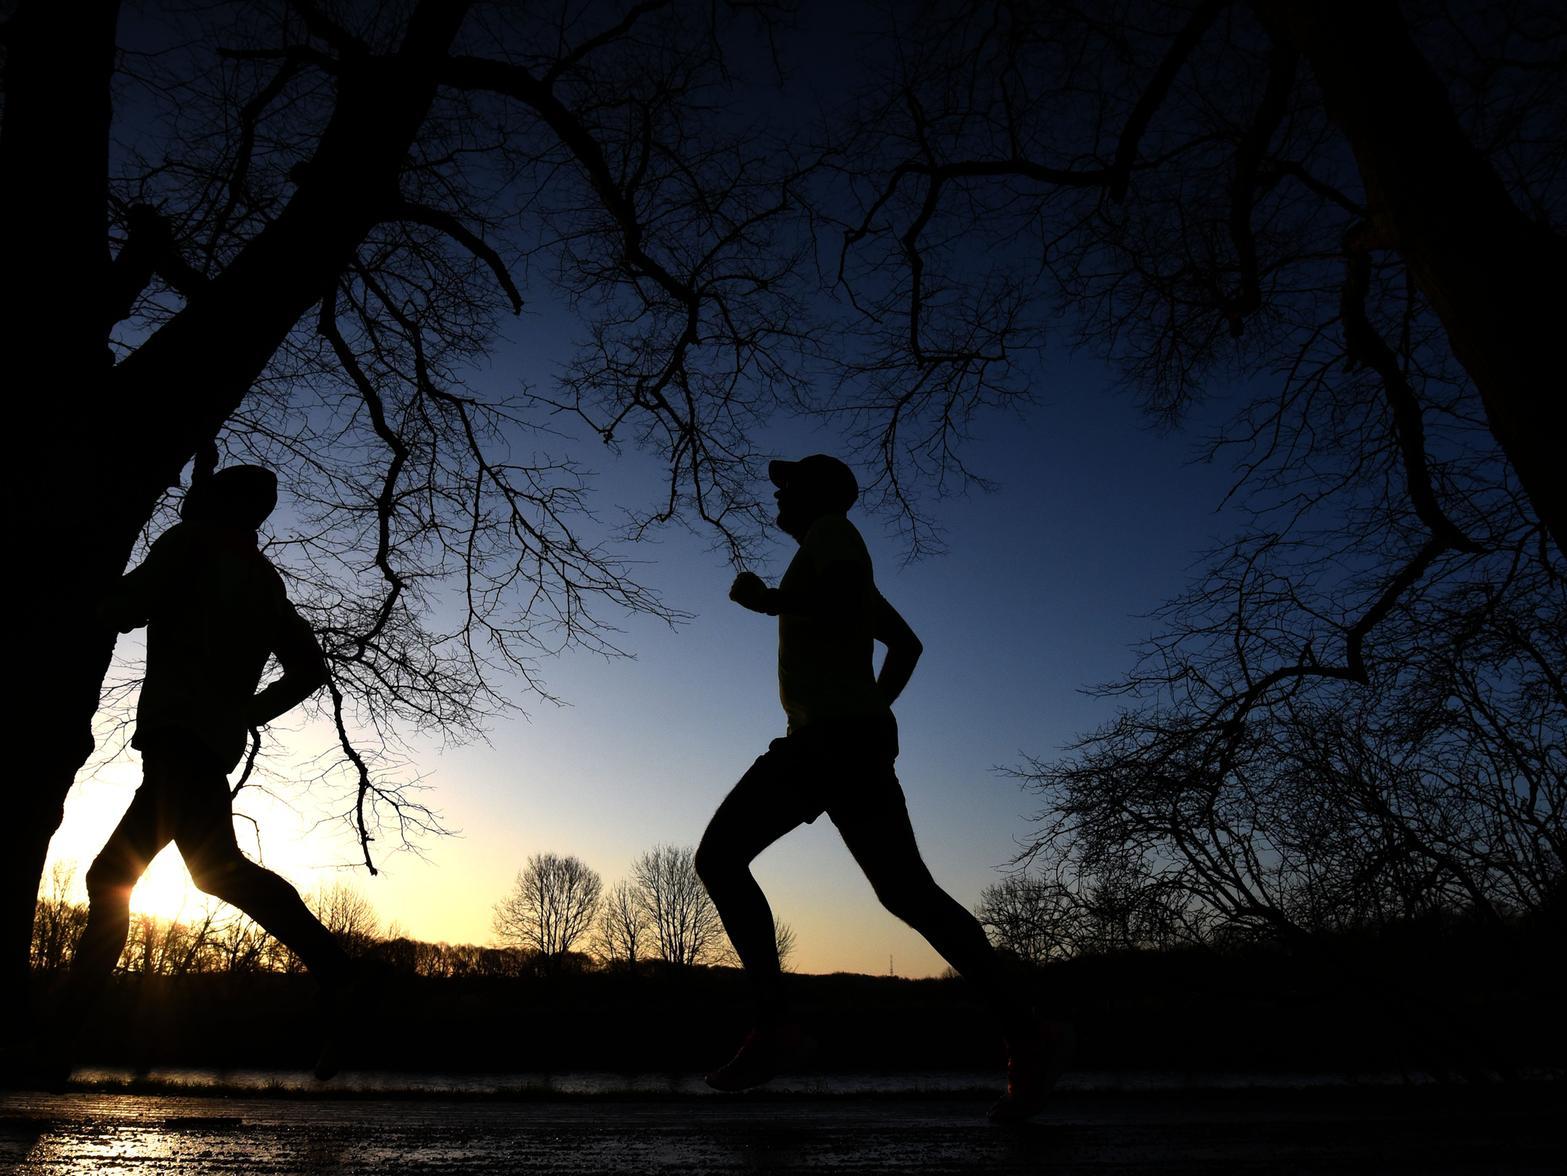 Parkrun organisers say the number of people has been climbing steadily with 460 runners on Boxing Day and 663 people showing up just two weeks later.